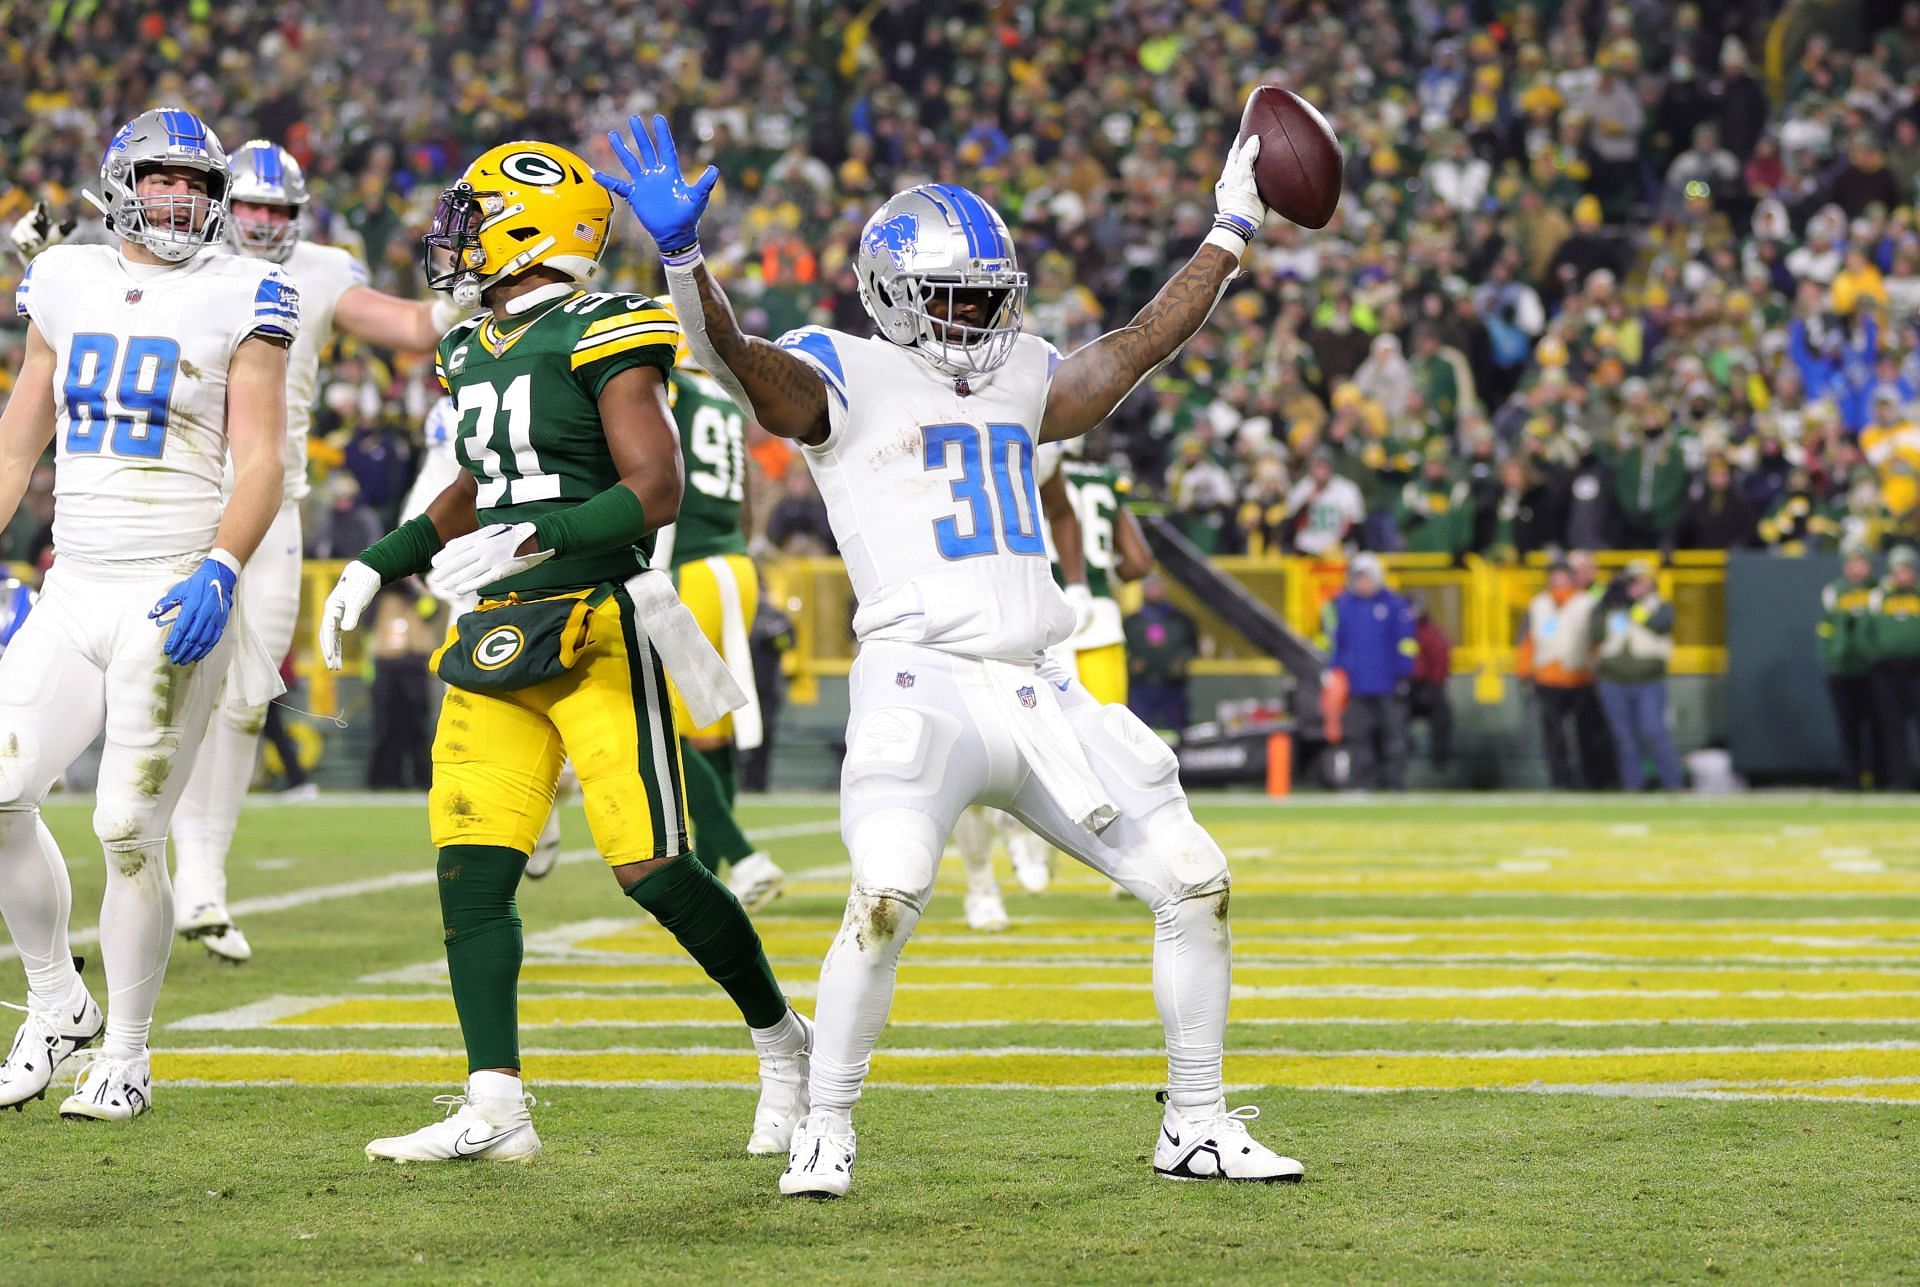 Jamaal Williams #30 celebrates a touchdown against the Green Bay Packers